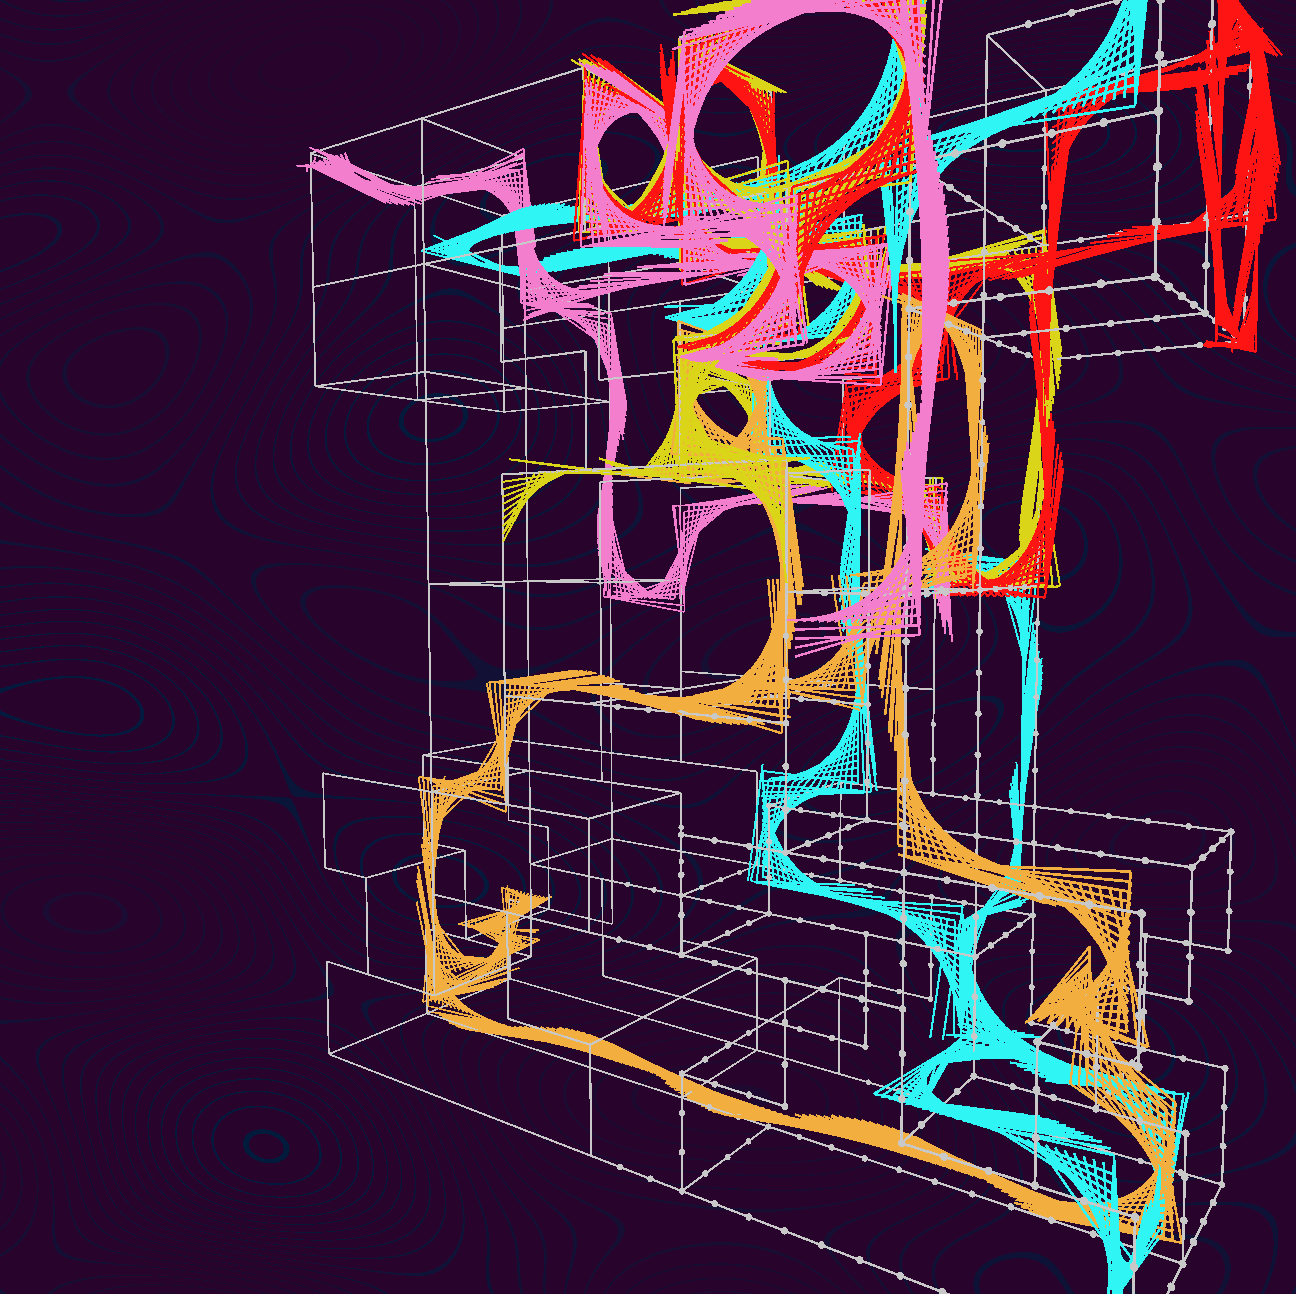 A number of pink, yellow, red, green, blue, and orange paths traveling through a three-dimensional maze outlined in white, that replicate different paths the ghosts and the character of Pac-Man can take in the Pac-Man arcade game.